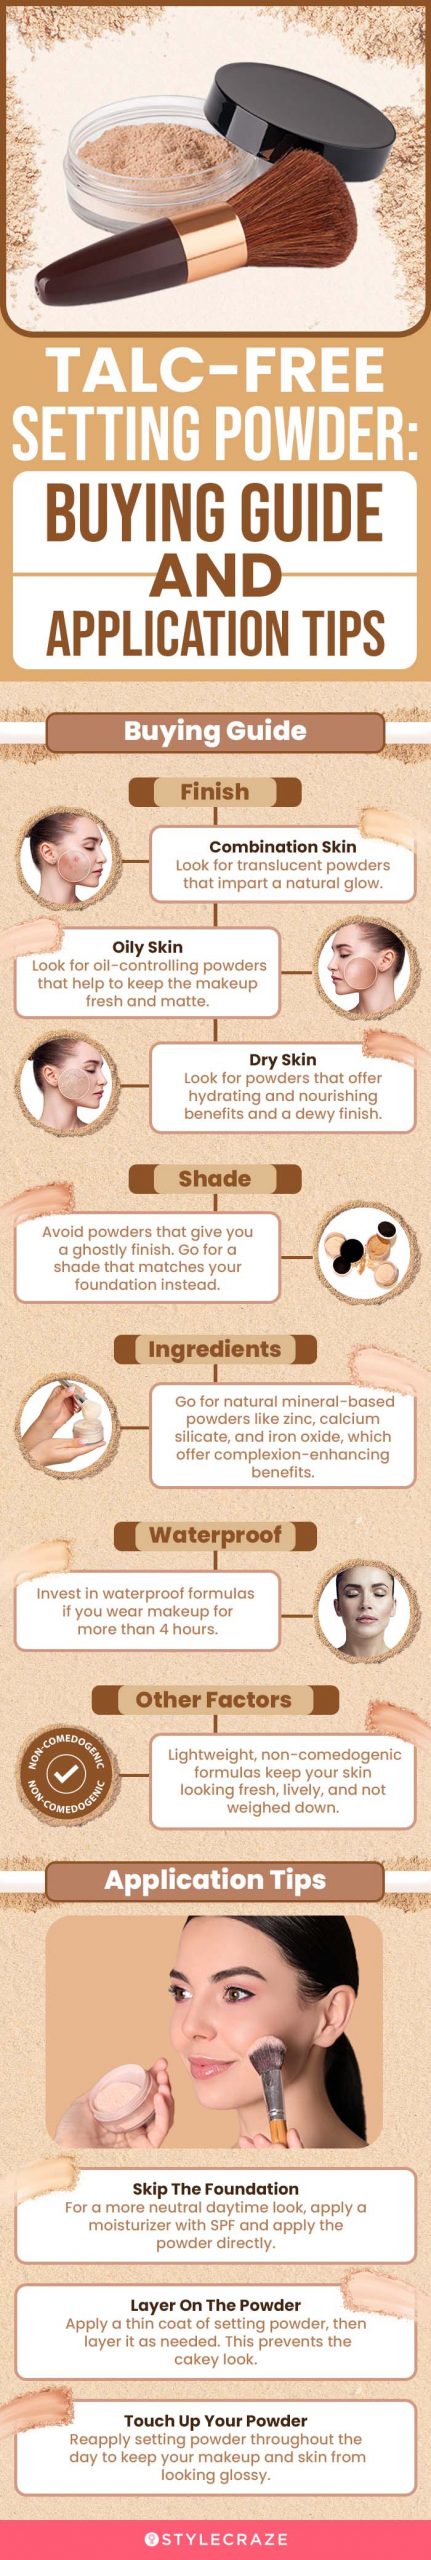 Talc-Free Setting Powder: Buying Guide And Application Ti [infographic]